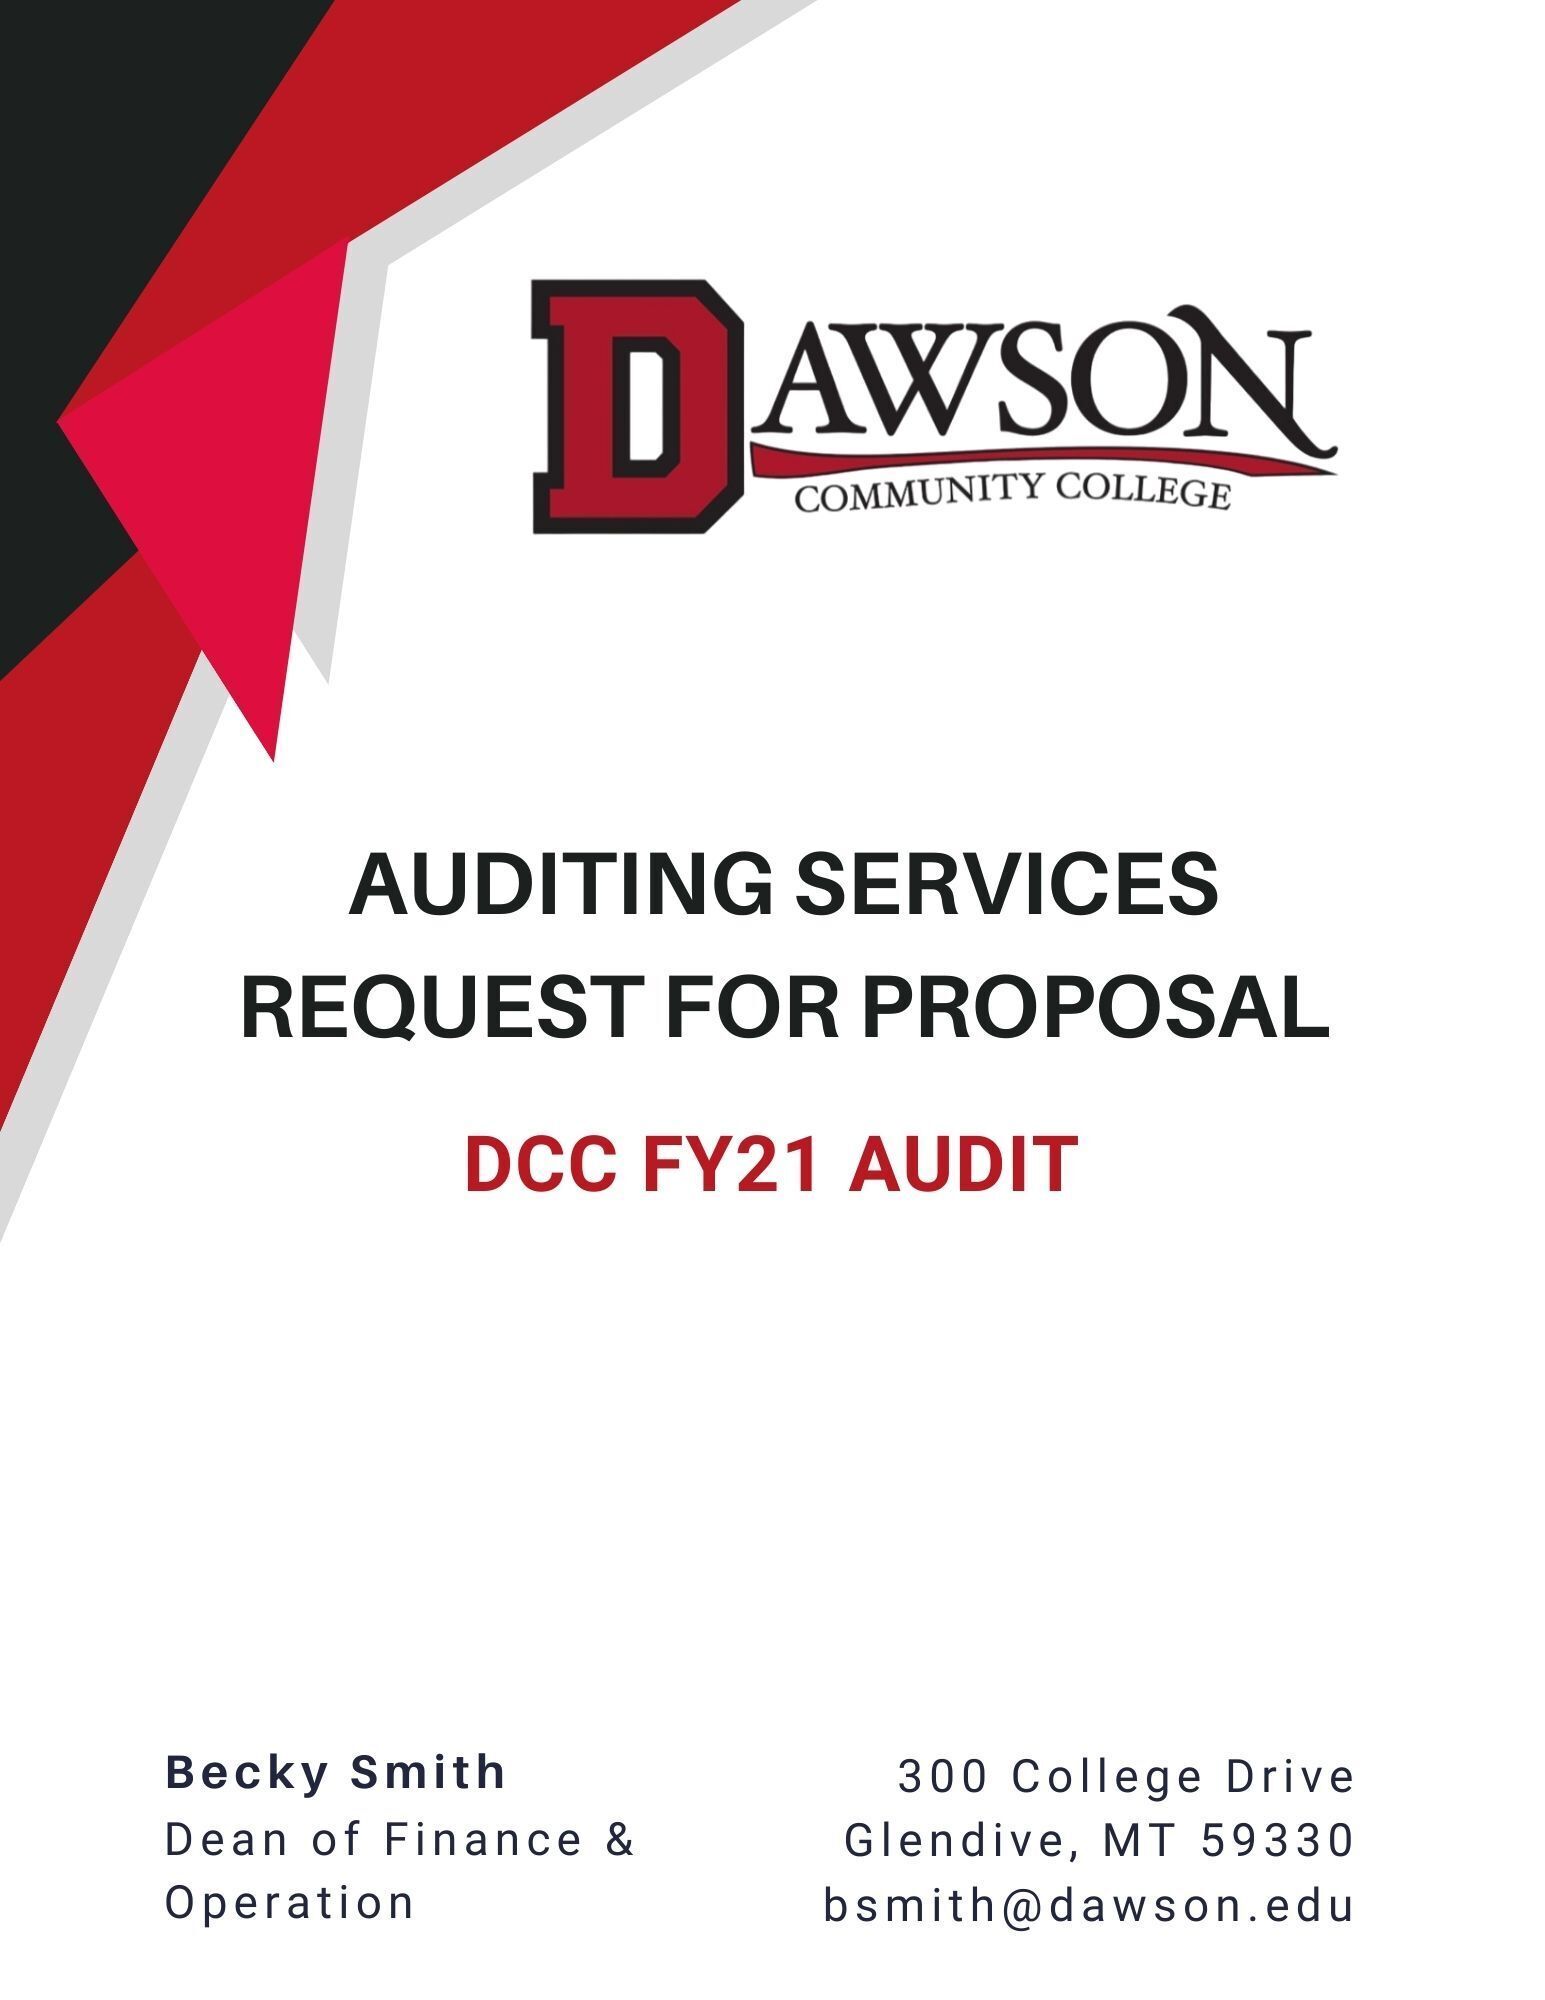 Auditing Services Request for Proposal